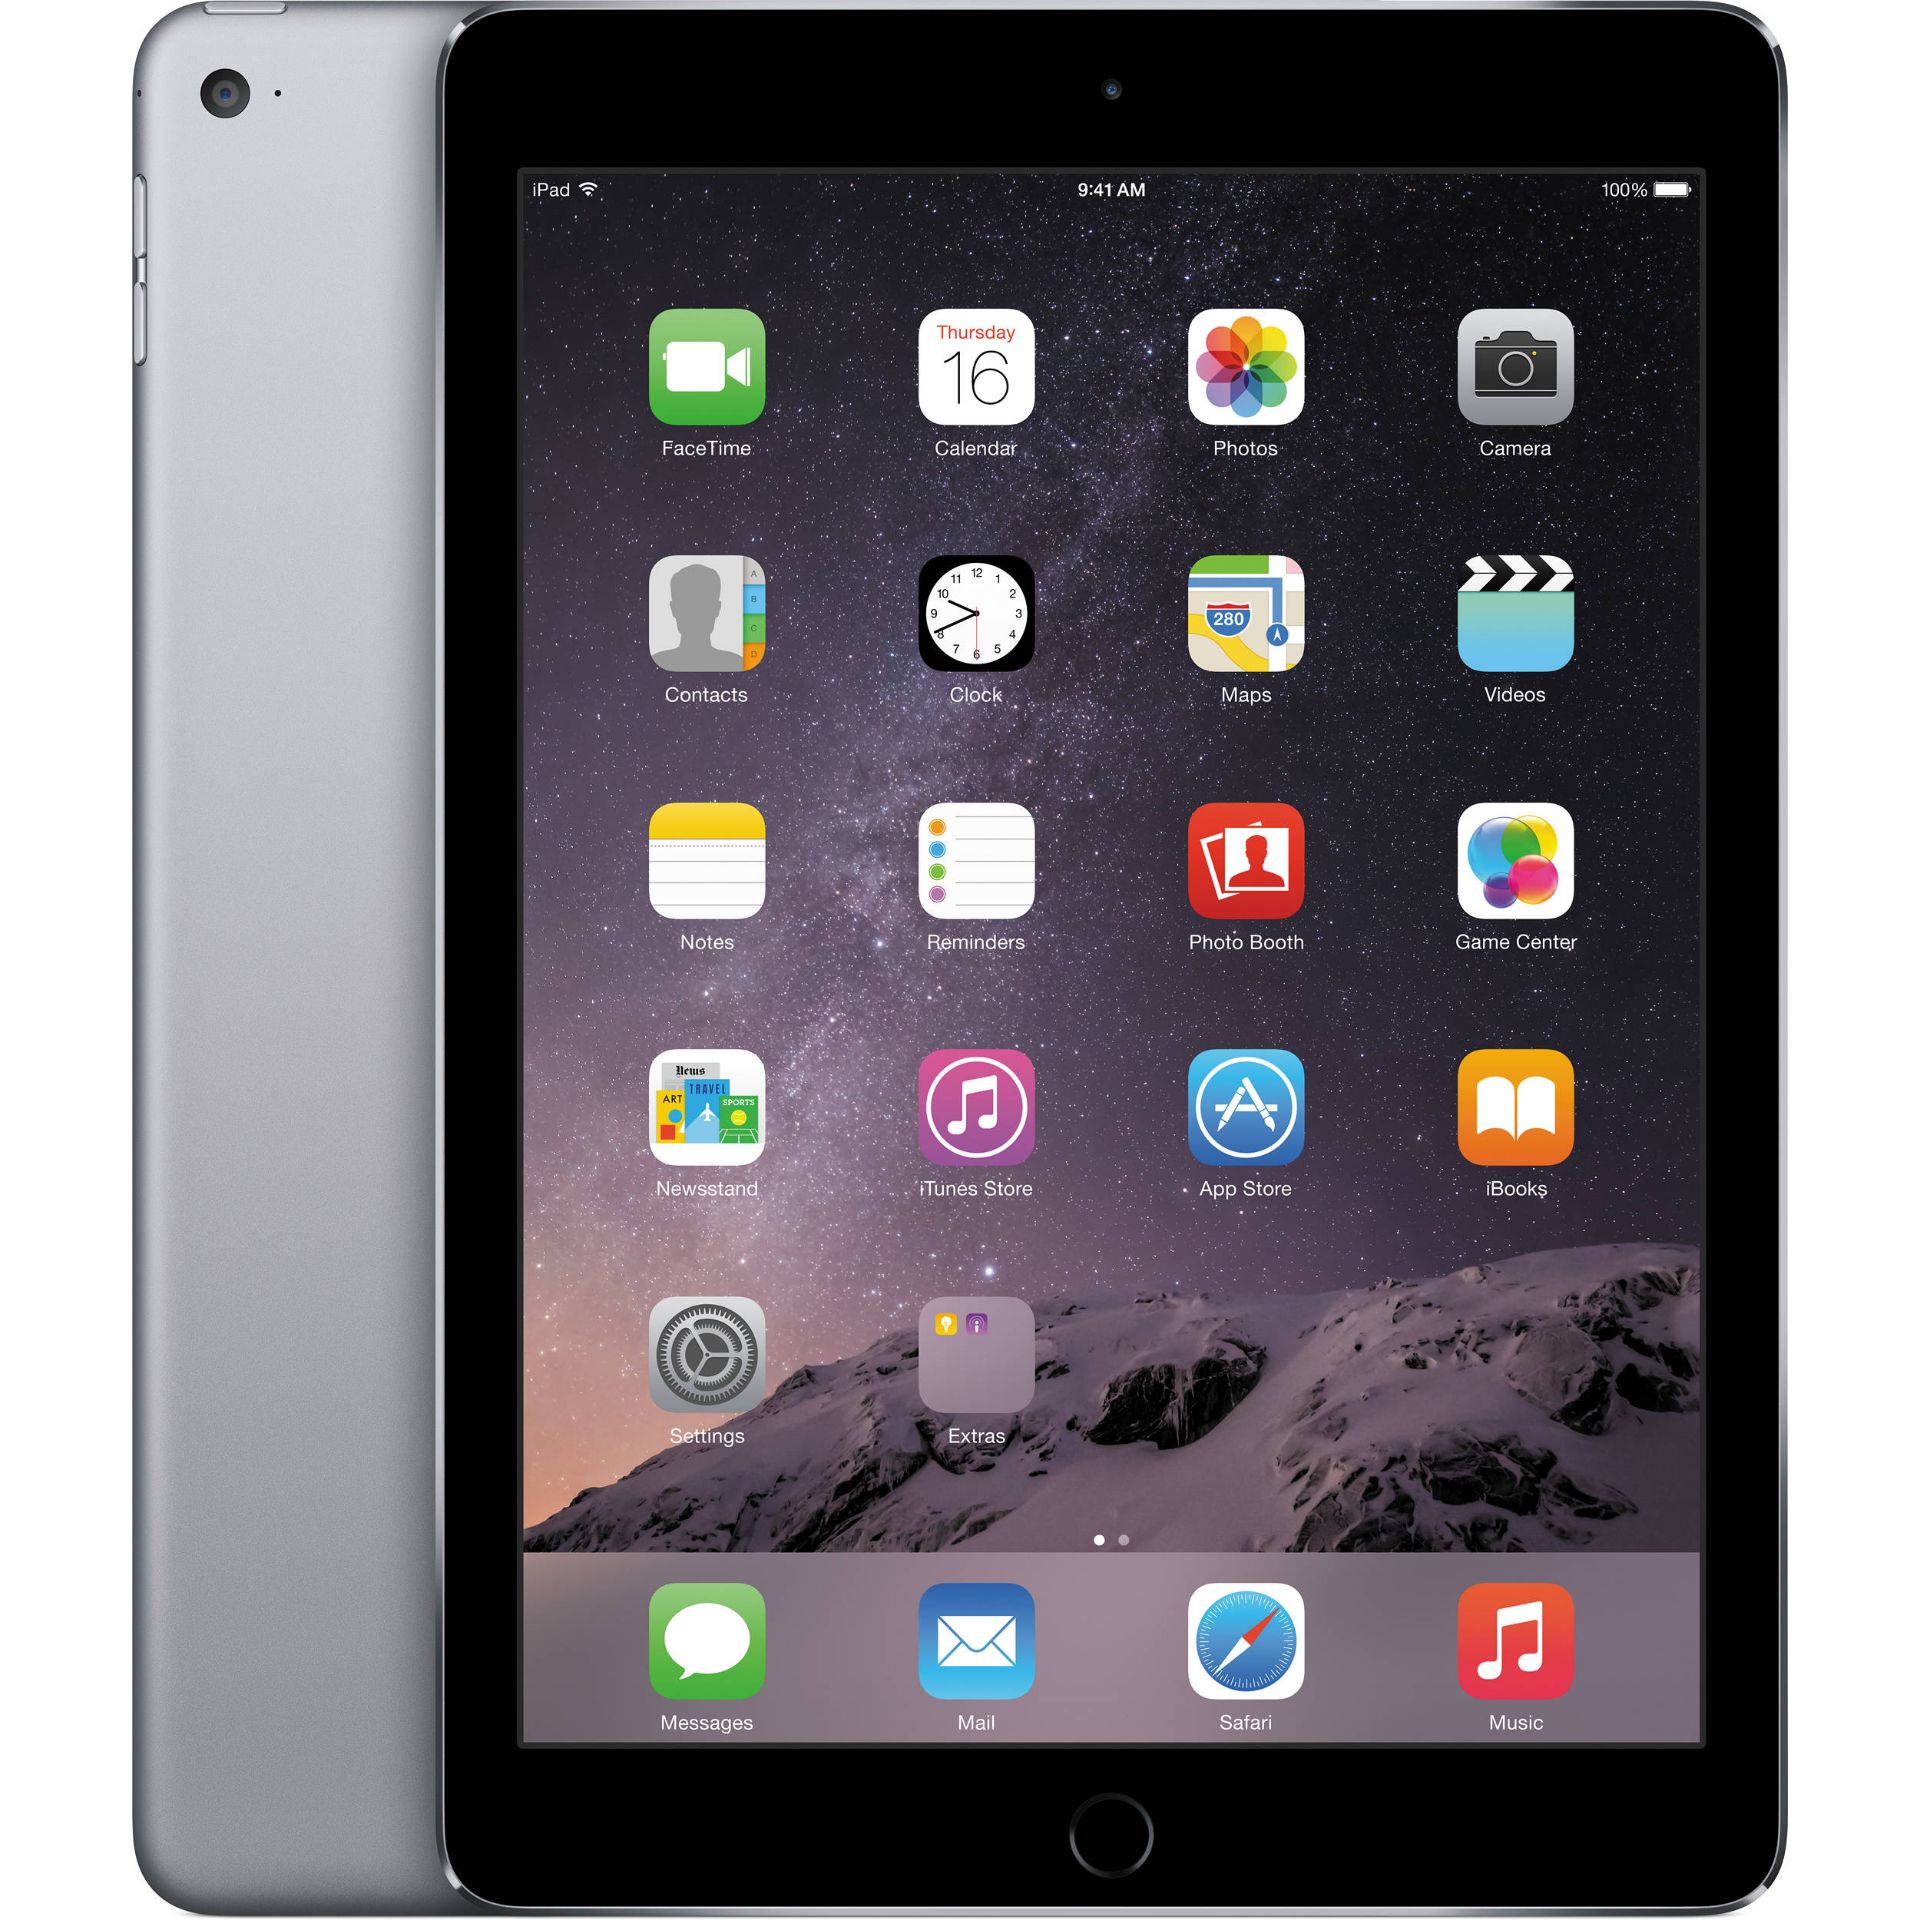 V Grade A IPad Air Wi-Fi 16GB Space Grey 9.7" In Apple Box With Accessories Amazon Price - £263.00